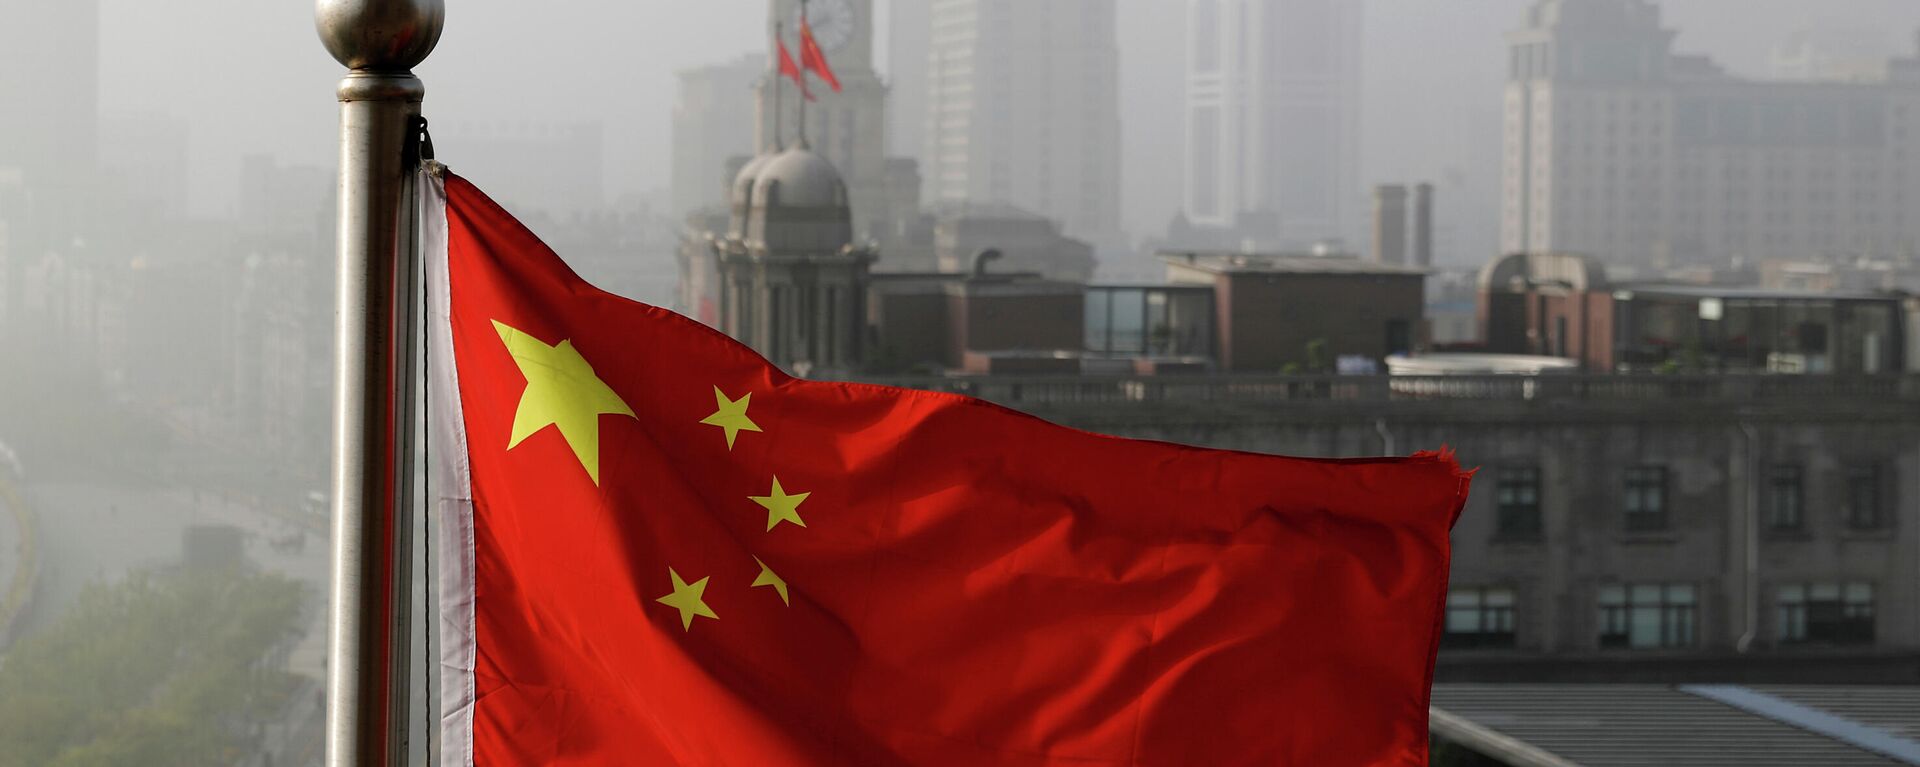 FILE - In this April 14, 2016 file photo, a Chinese national flag flutters against the office buildings in Shanghai, China - Sputnik International, 1920, 05.11.2021